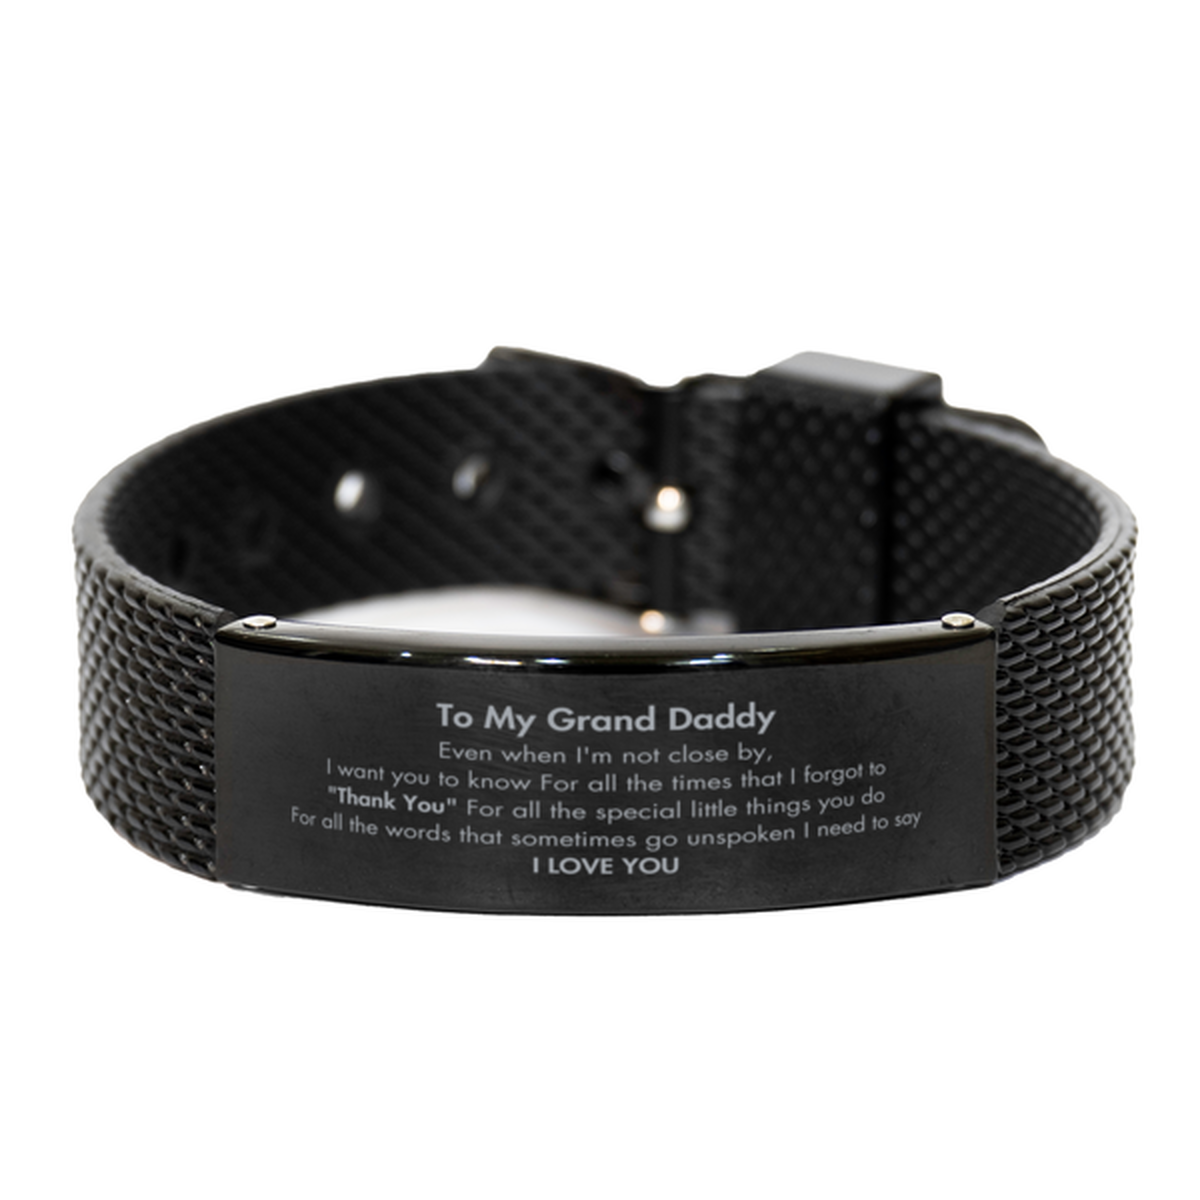 Thank You Gifts for Grand Daddy, Keepsake Black Shark Mesh Bracelet Gifts for Grand Daddy Birthday Mother's day Father's Day Grand Daddy For all the words That sometimes go unspoken I need to say I LOVE YOU